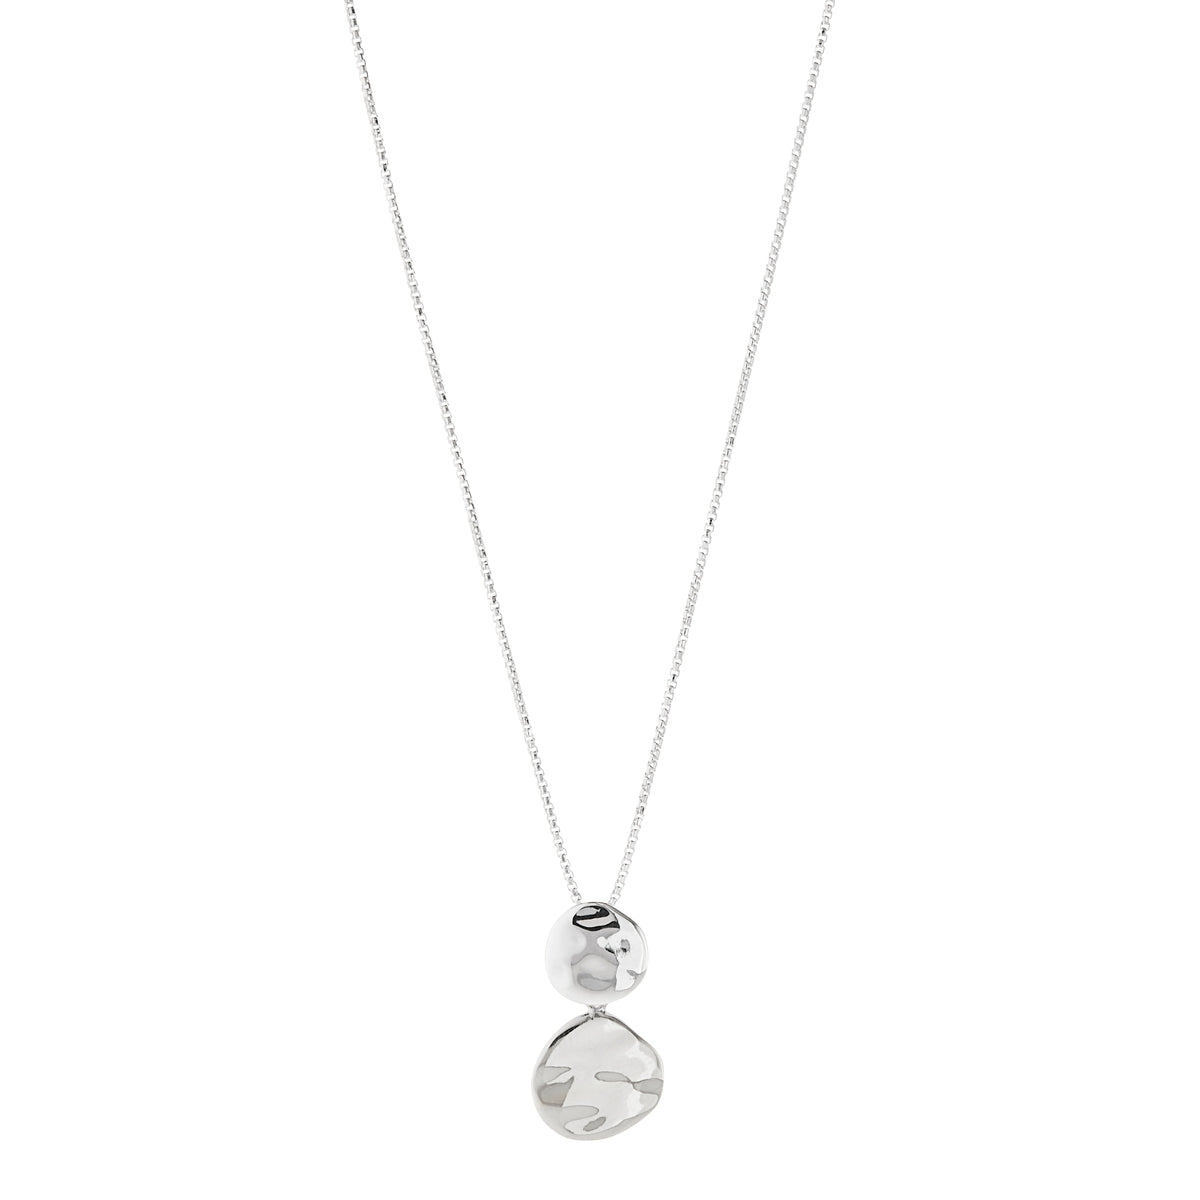 NAJO Shard Double Disk Necklace